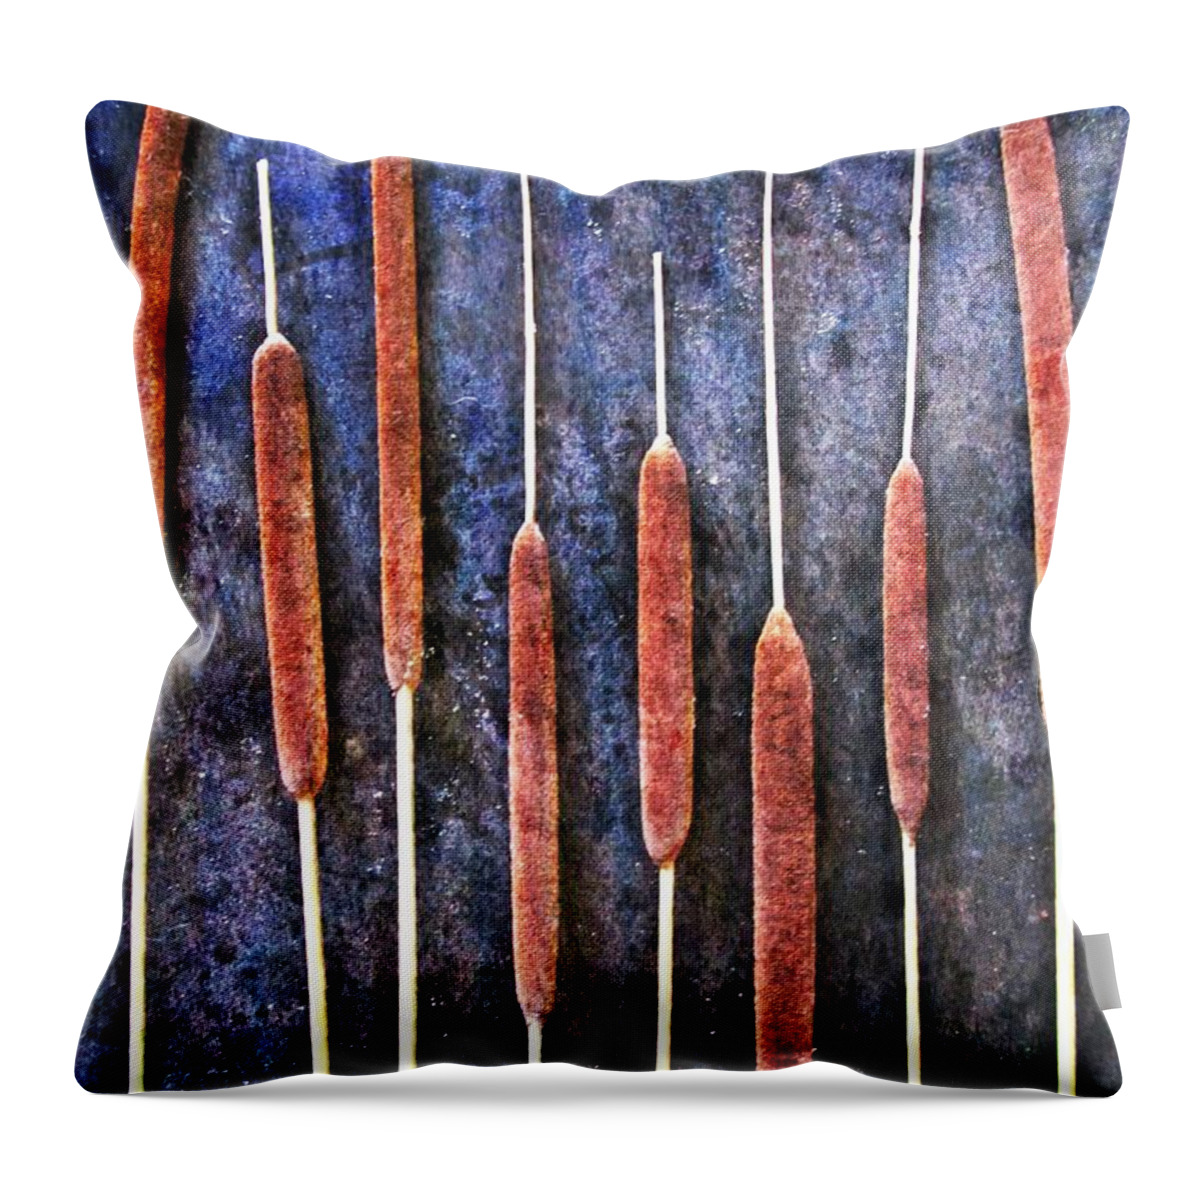 Nature Throw Pillow featuring the digital art Nature Abstract 26 by Maria Huntley